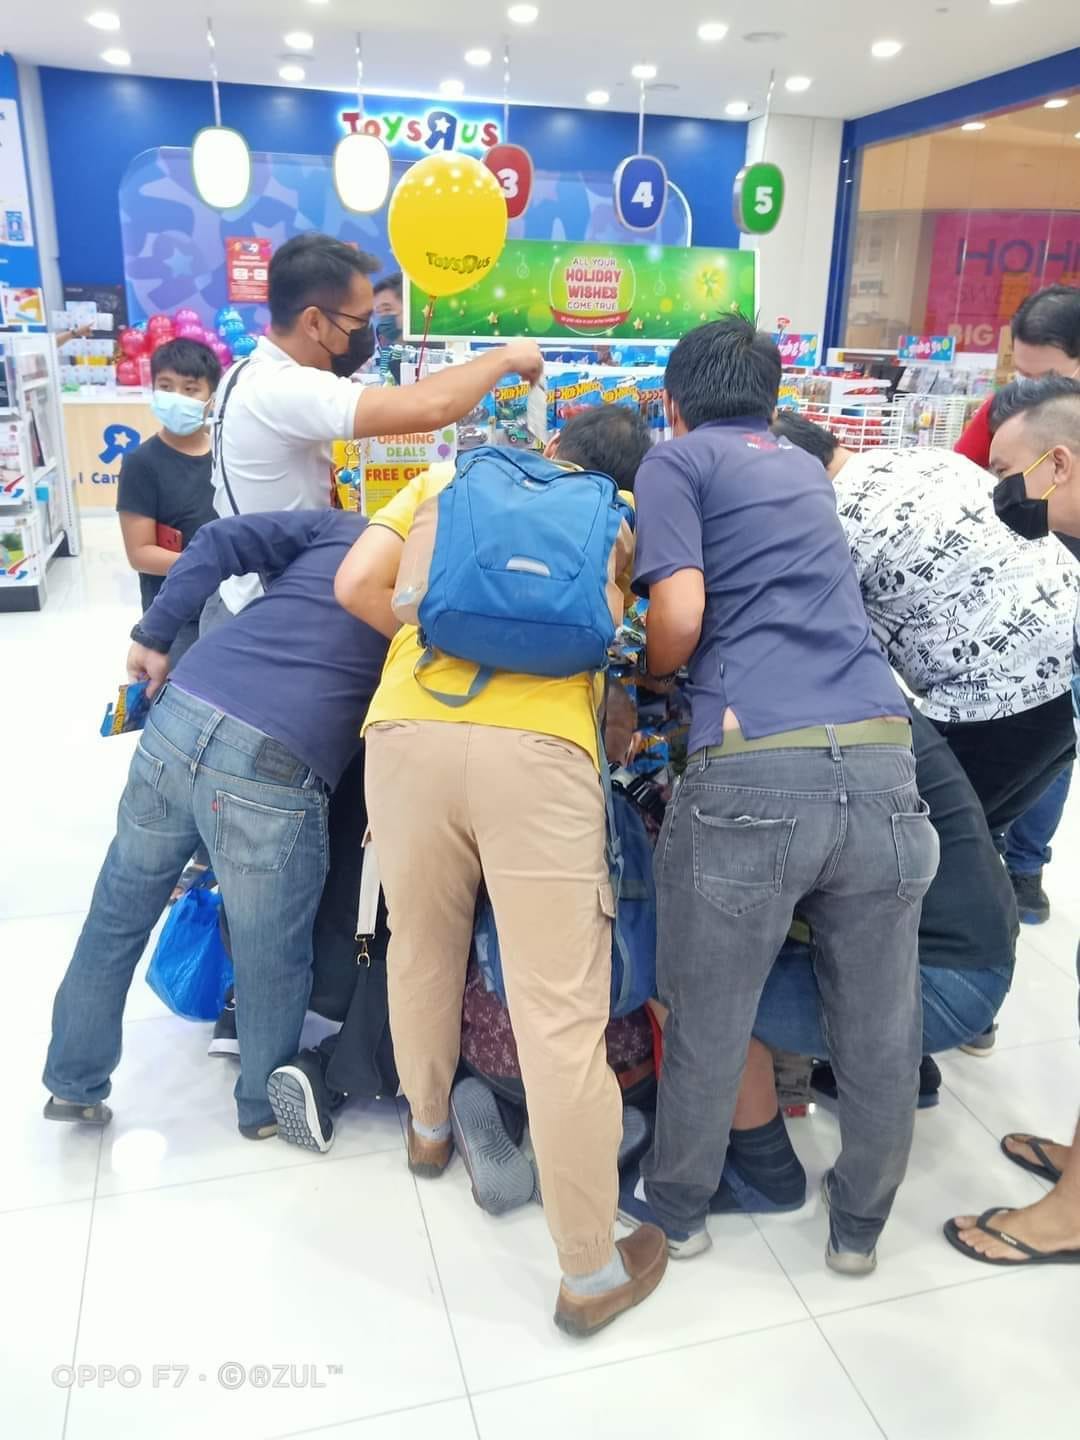 Scuffle breaks out at toys r us bukit jalil over toy car collection